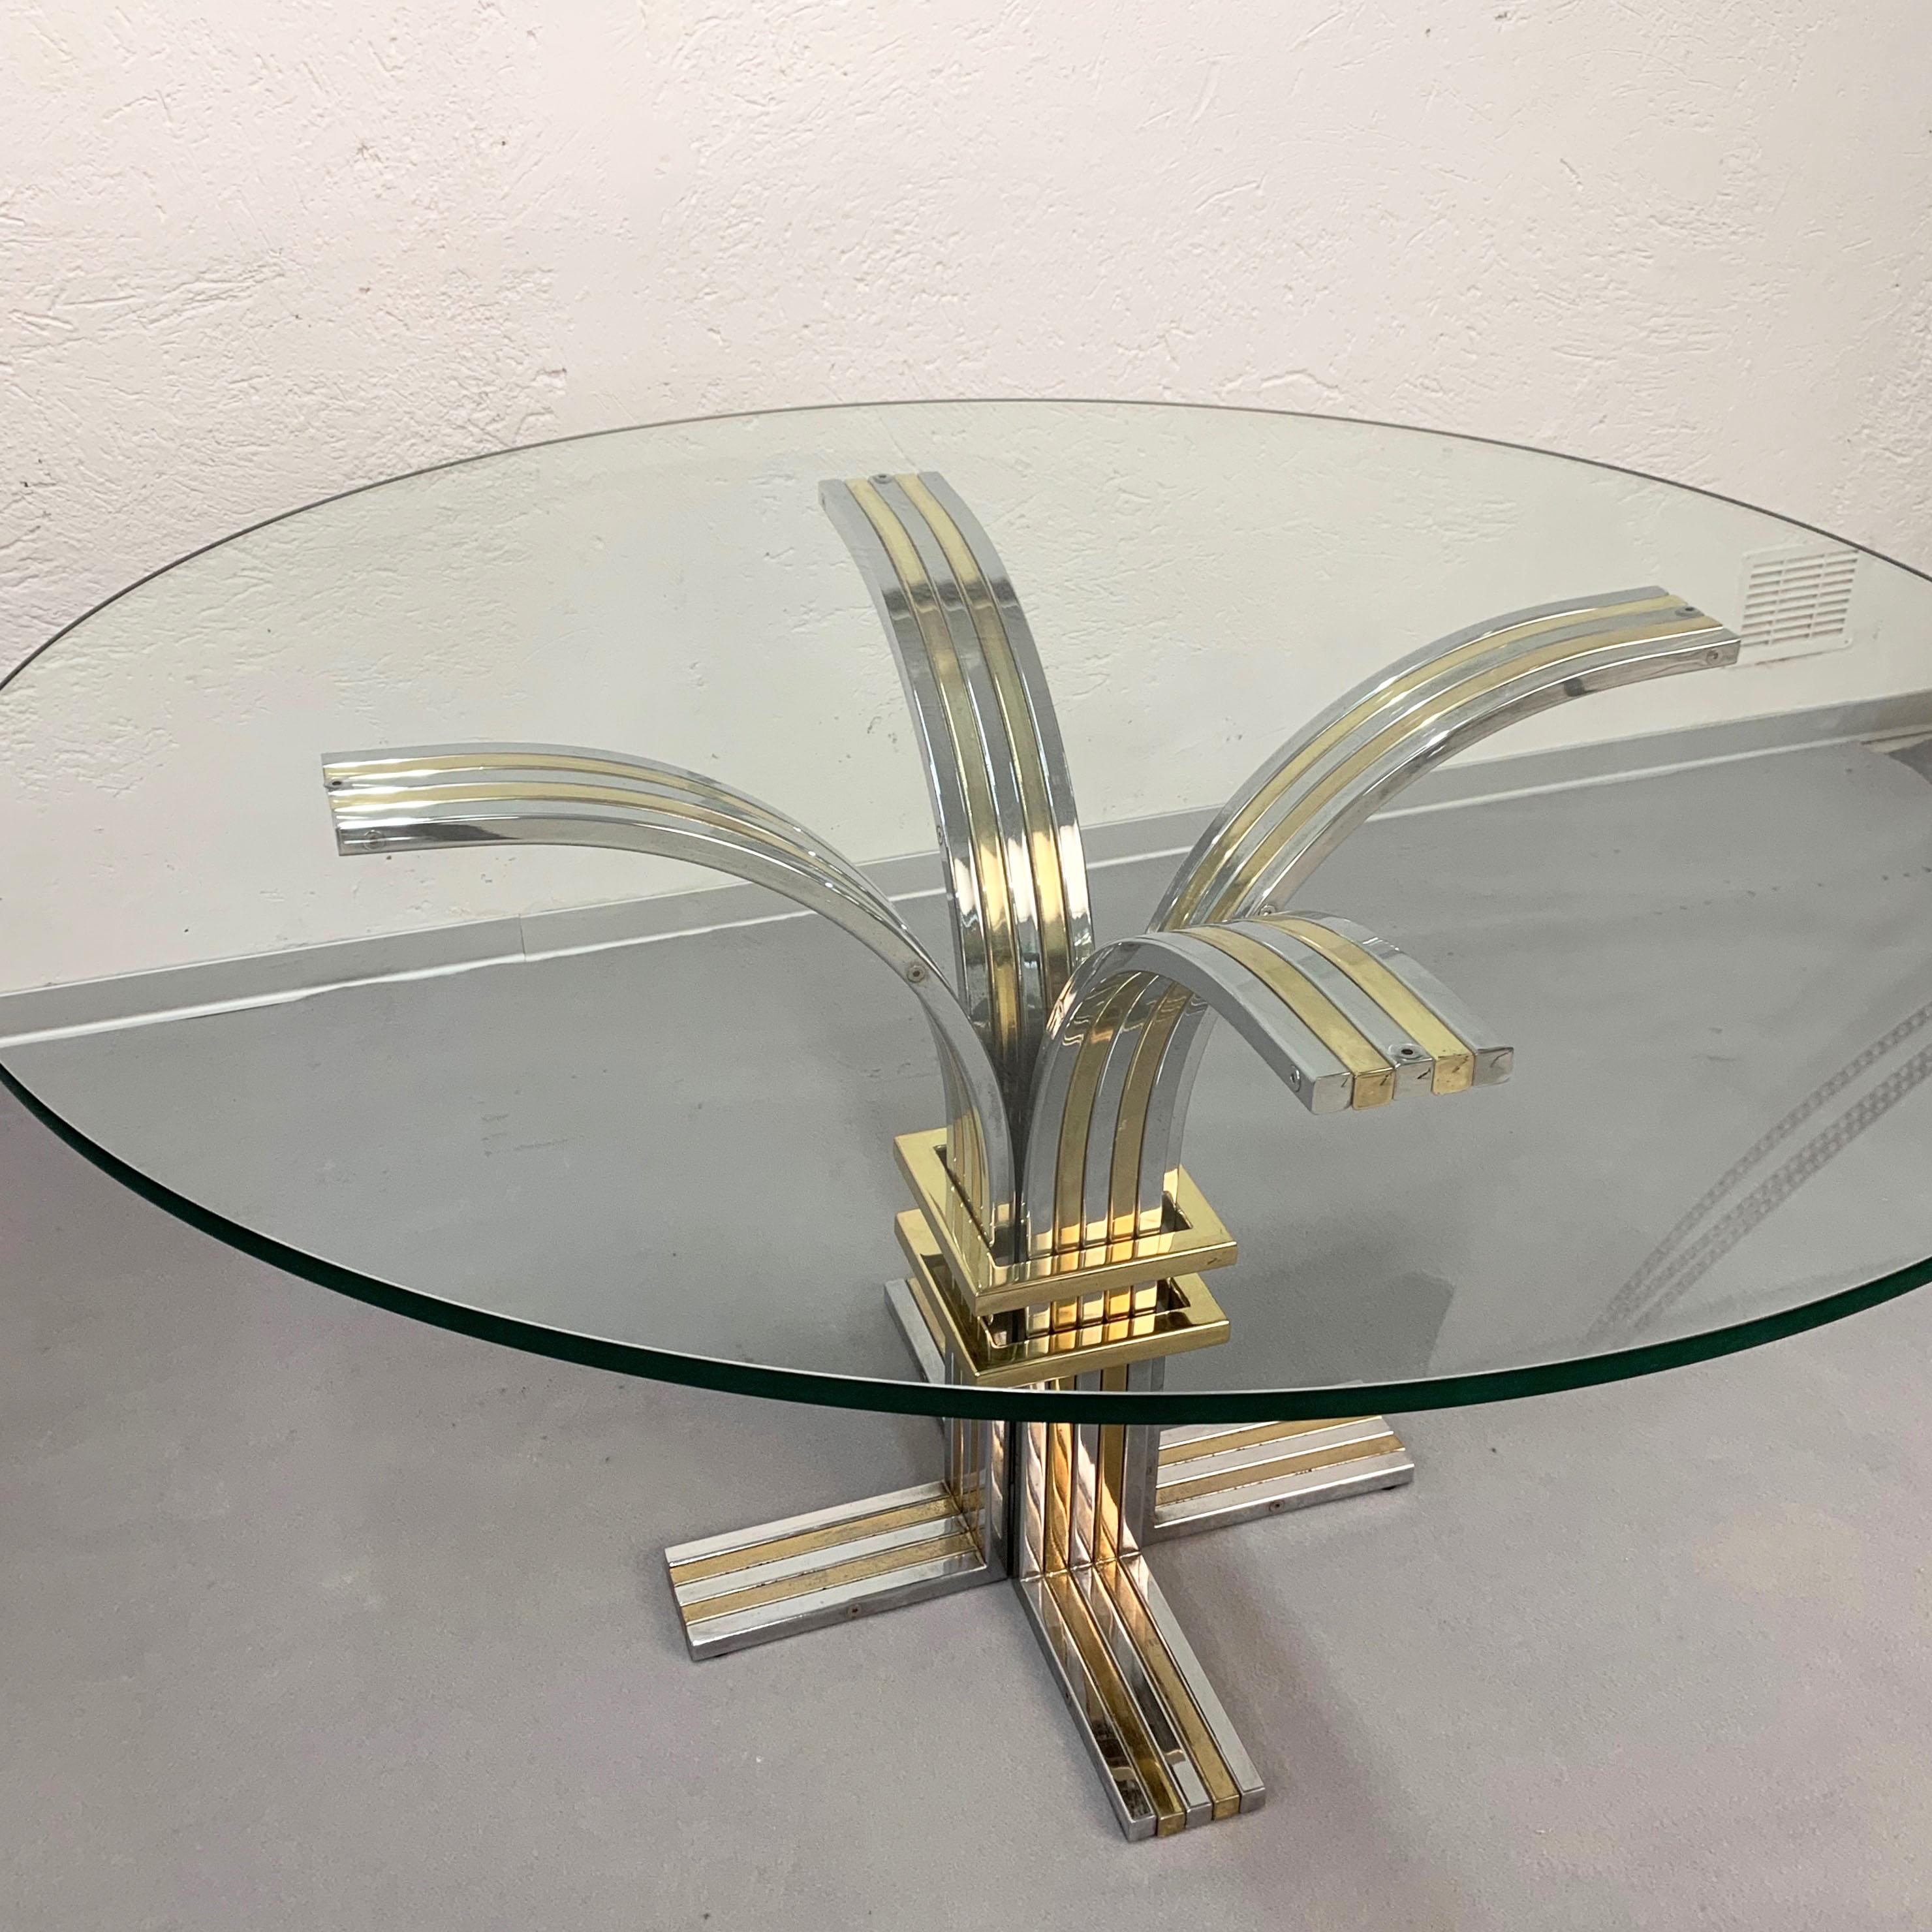 Midcentury gilded brass and chromed dining table. This fantastic item was produced in Italy during the 1970s by Banci and Firenze.

The brass and chromed structure bloom in four sides like a flower, with a horizontal element made of brass too. The